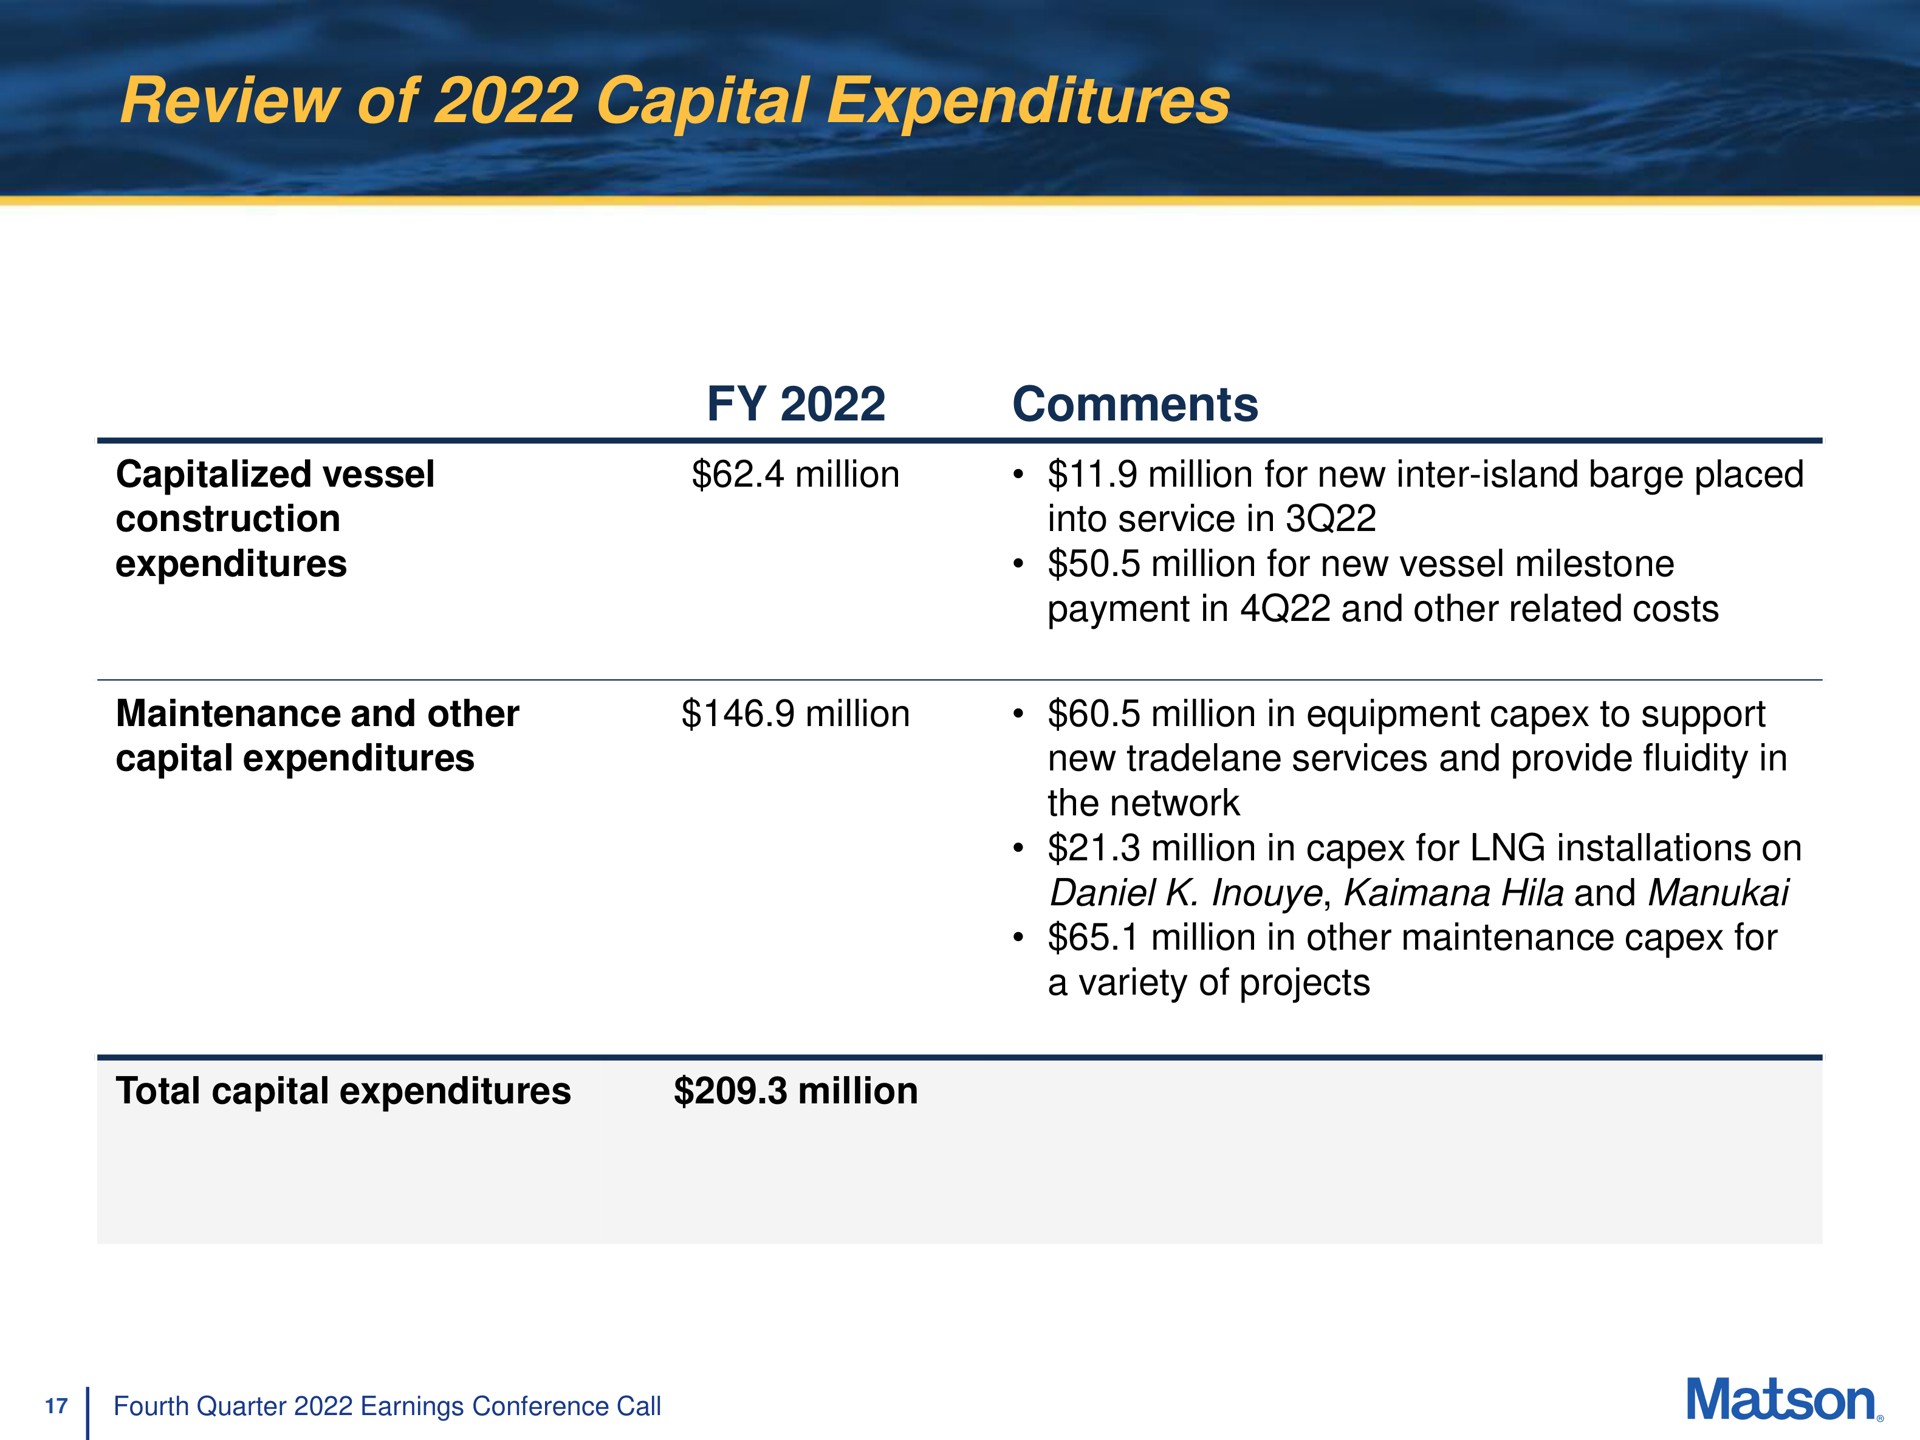 review of capital expenditures comments | Matson